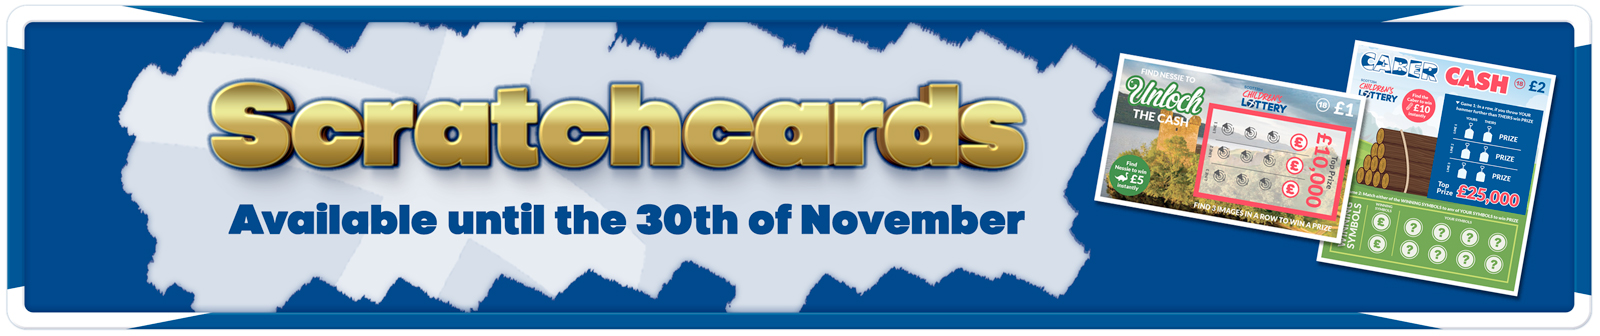 Scratchcards, available in selected shops